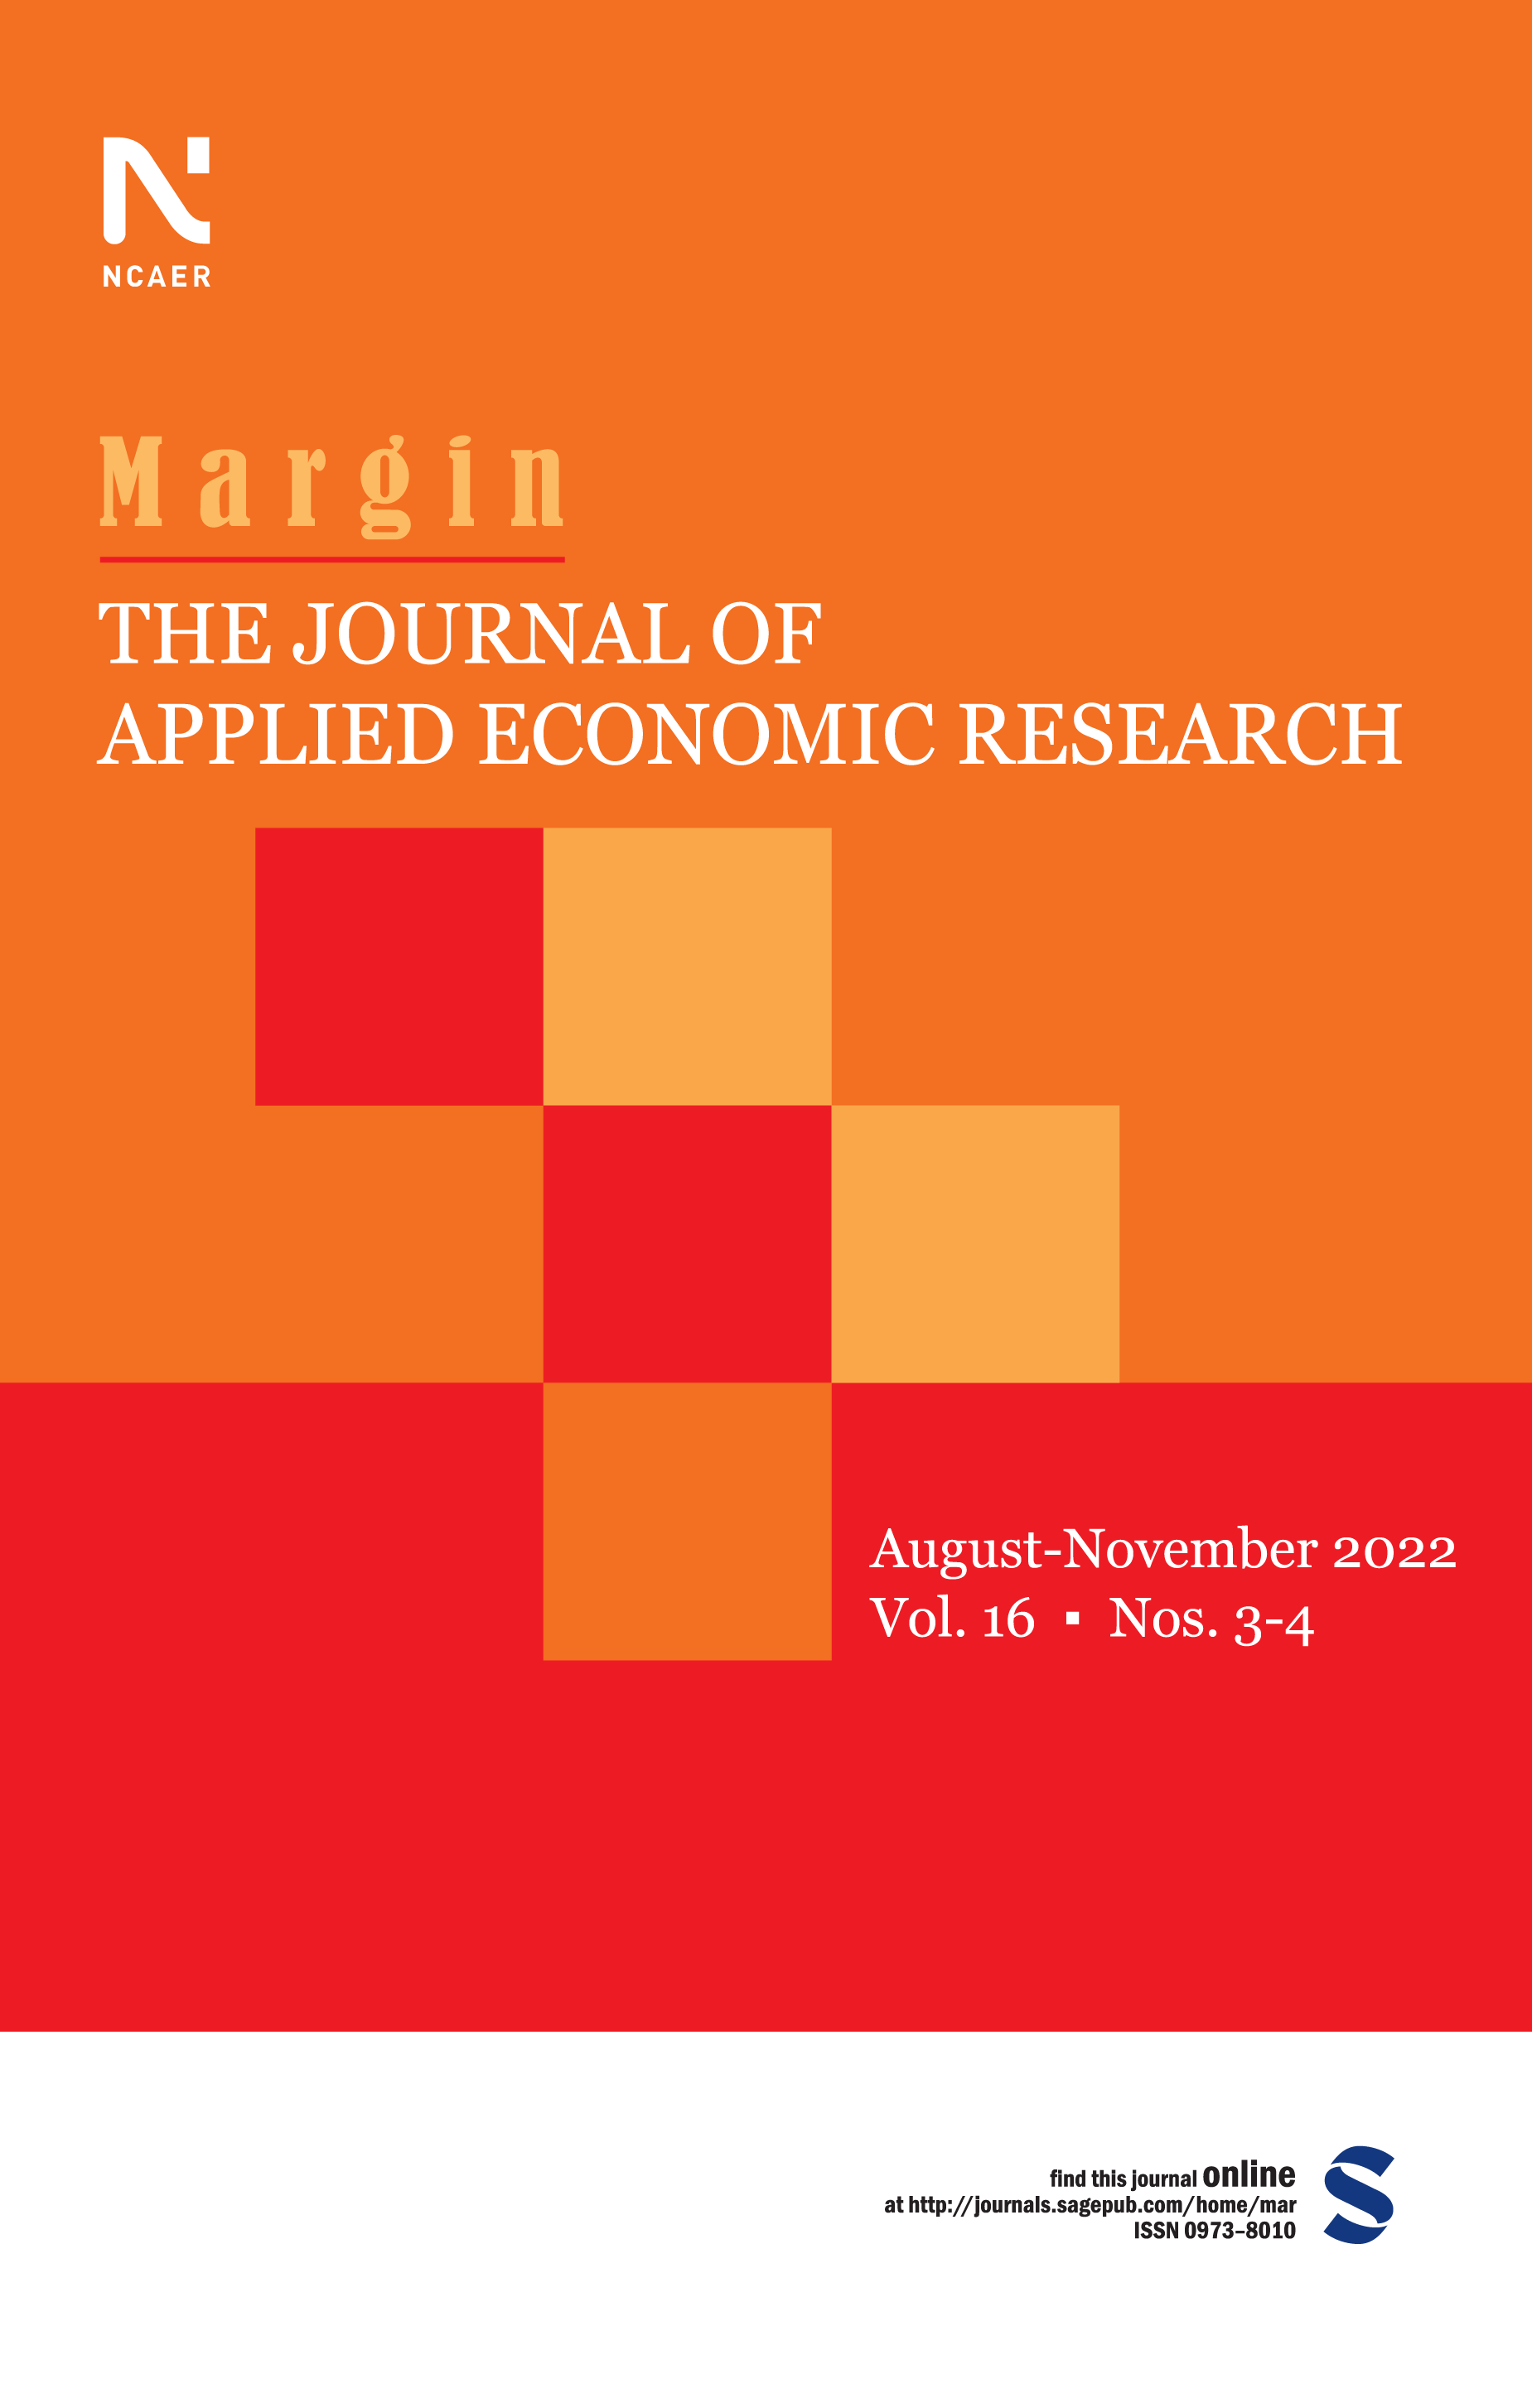 MARGIN: The Journal of Applied Economic Research